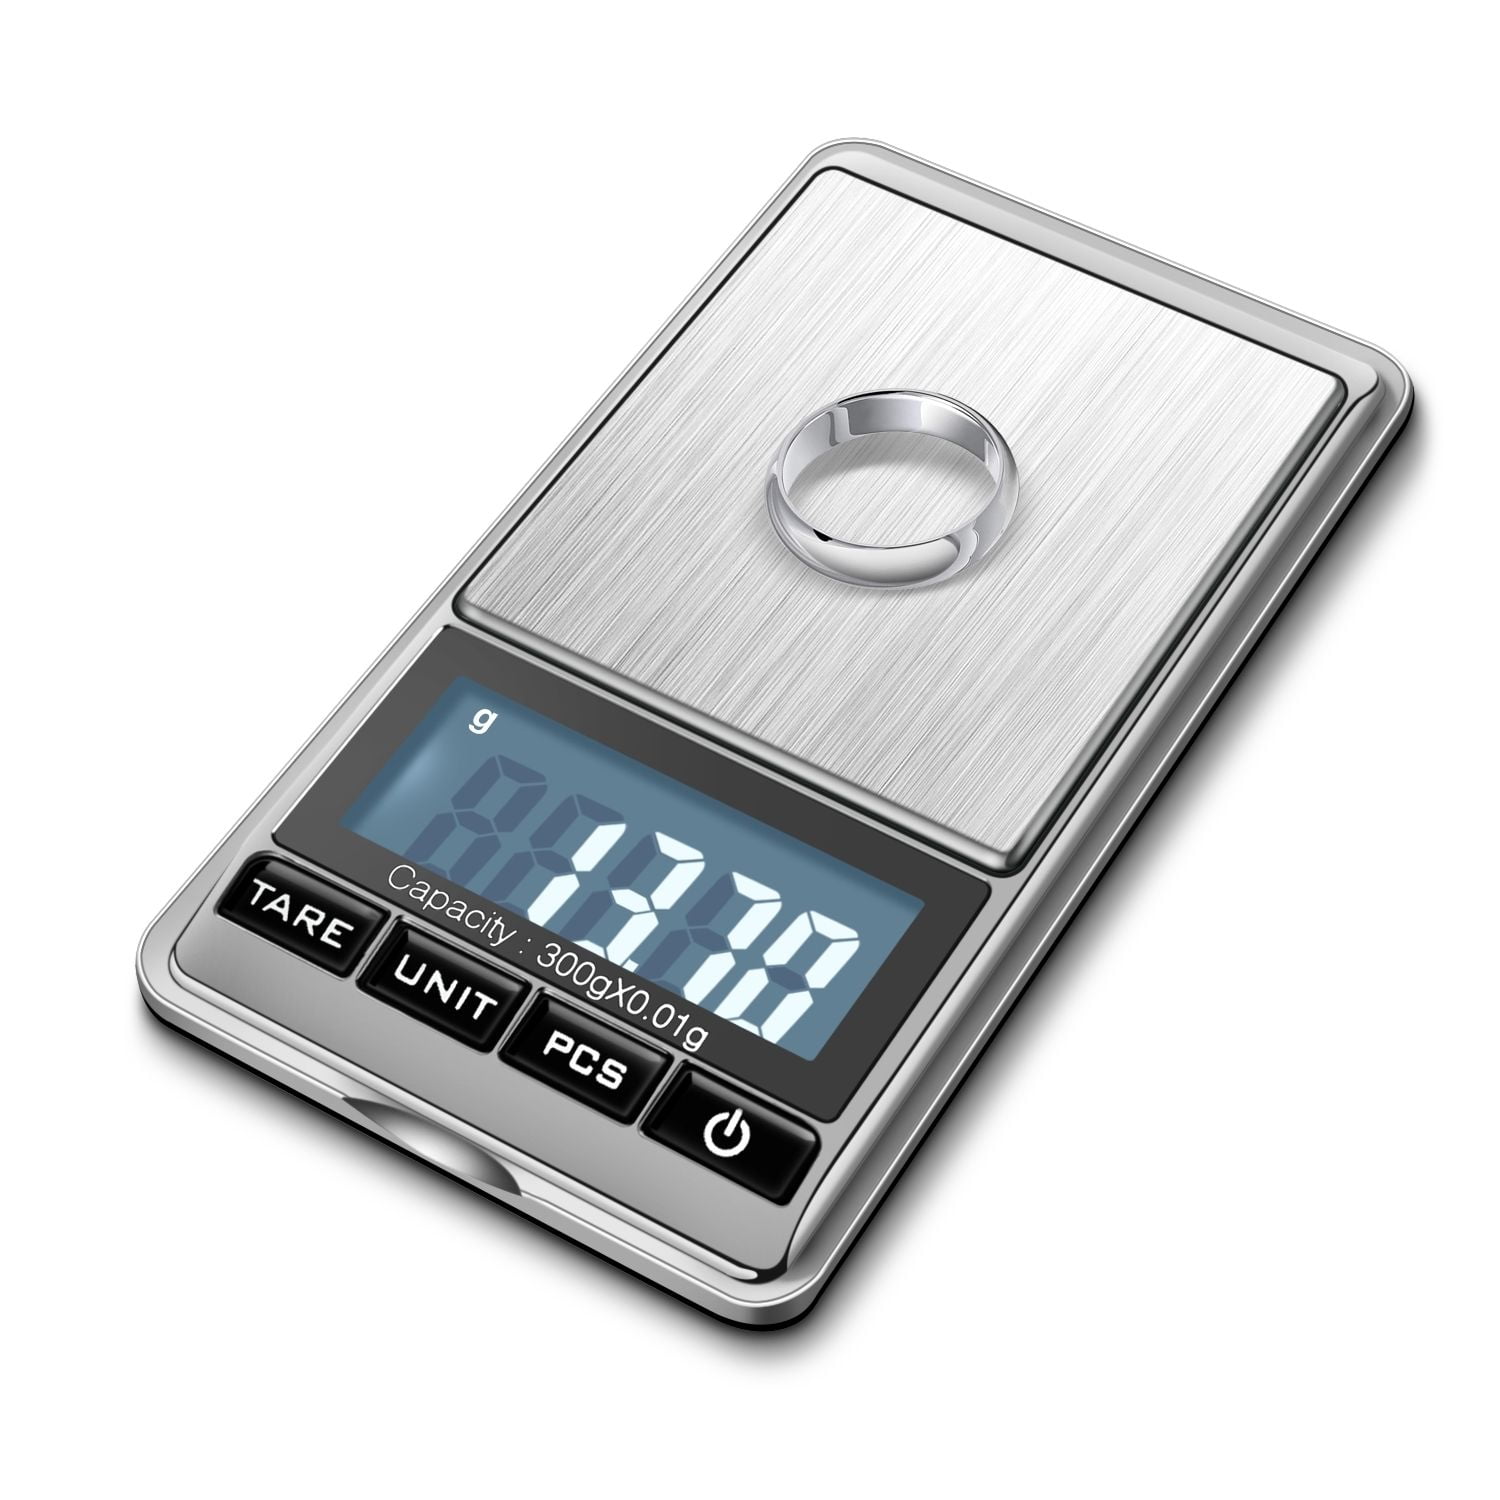 WEIGHTMAN WEIgHTMAN Digital Scale gram, 200g001g Pocket Scale gold Titanium  Plating, LcD Backlit Display, Mini Jewelry Scale with 6 Units